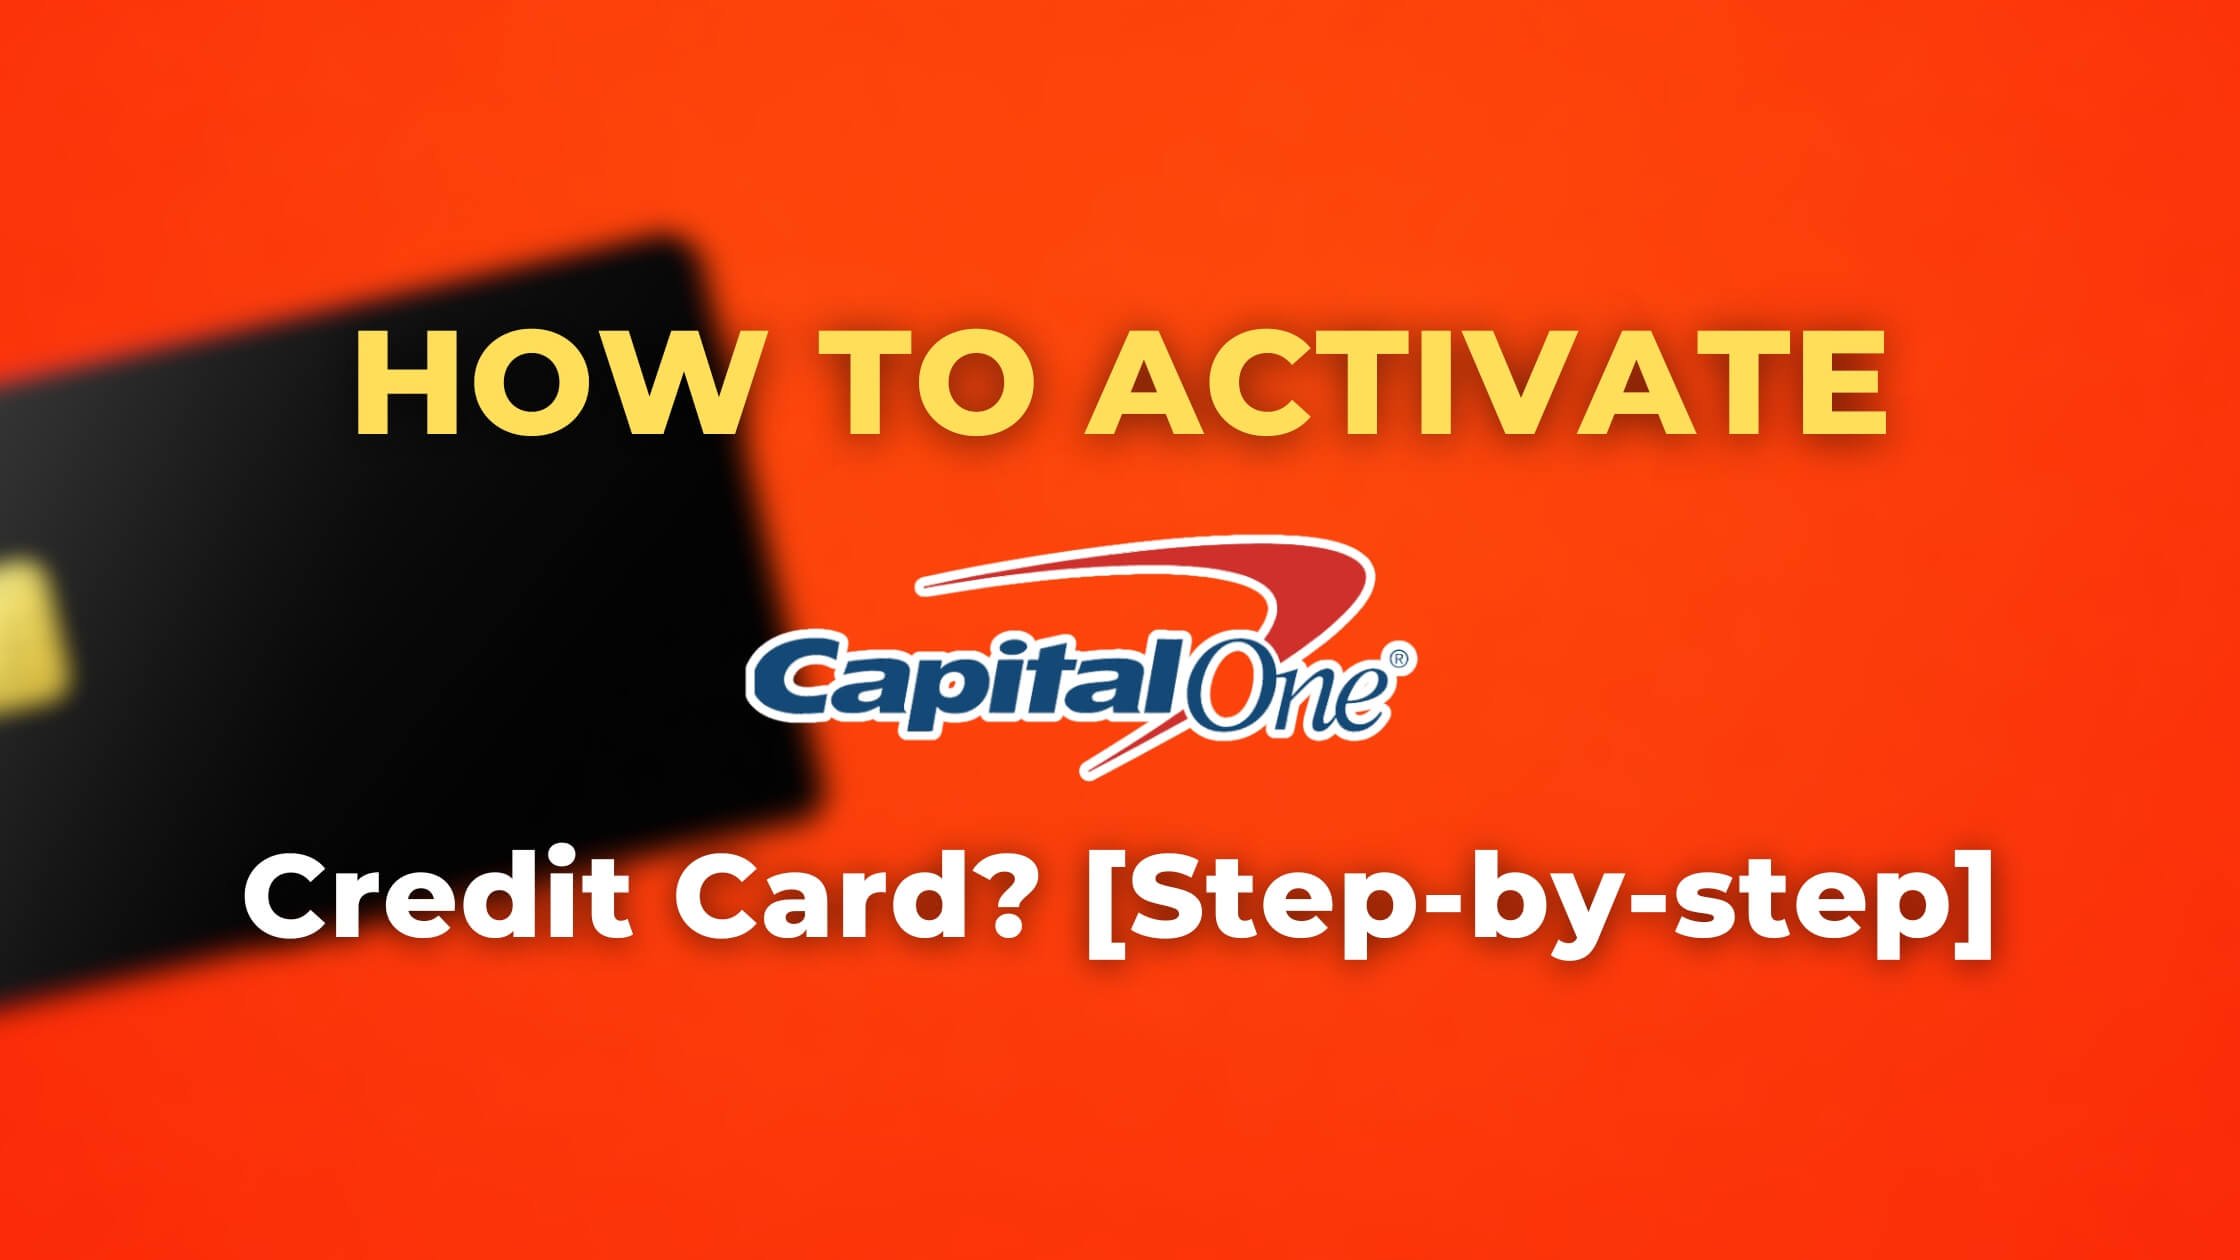 How to Activate a Capital One Credit Card